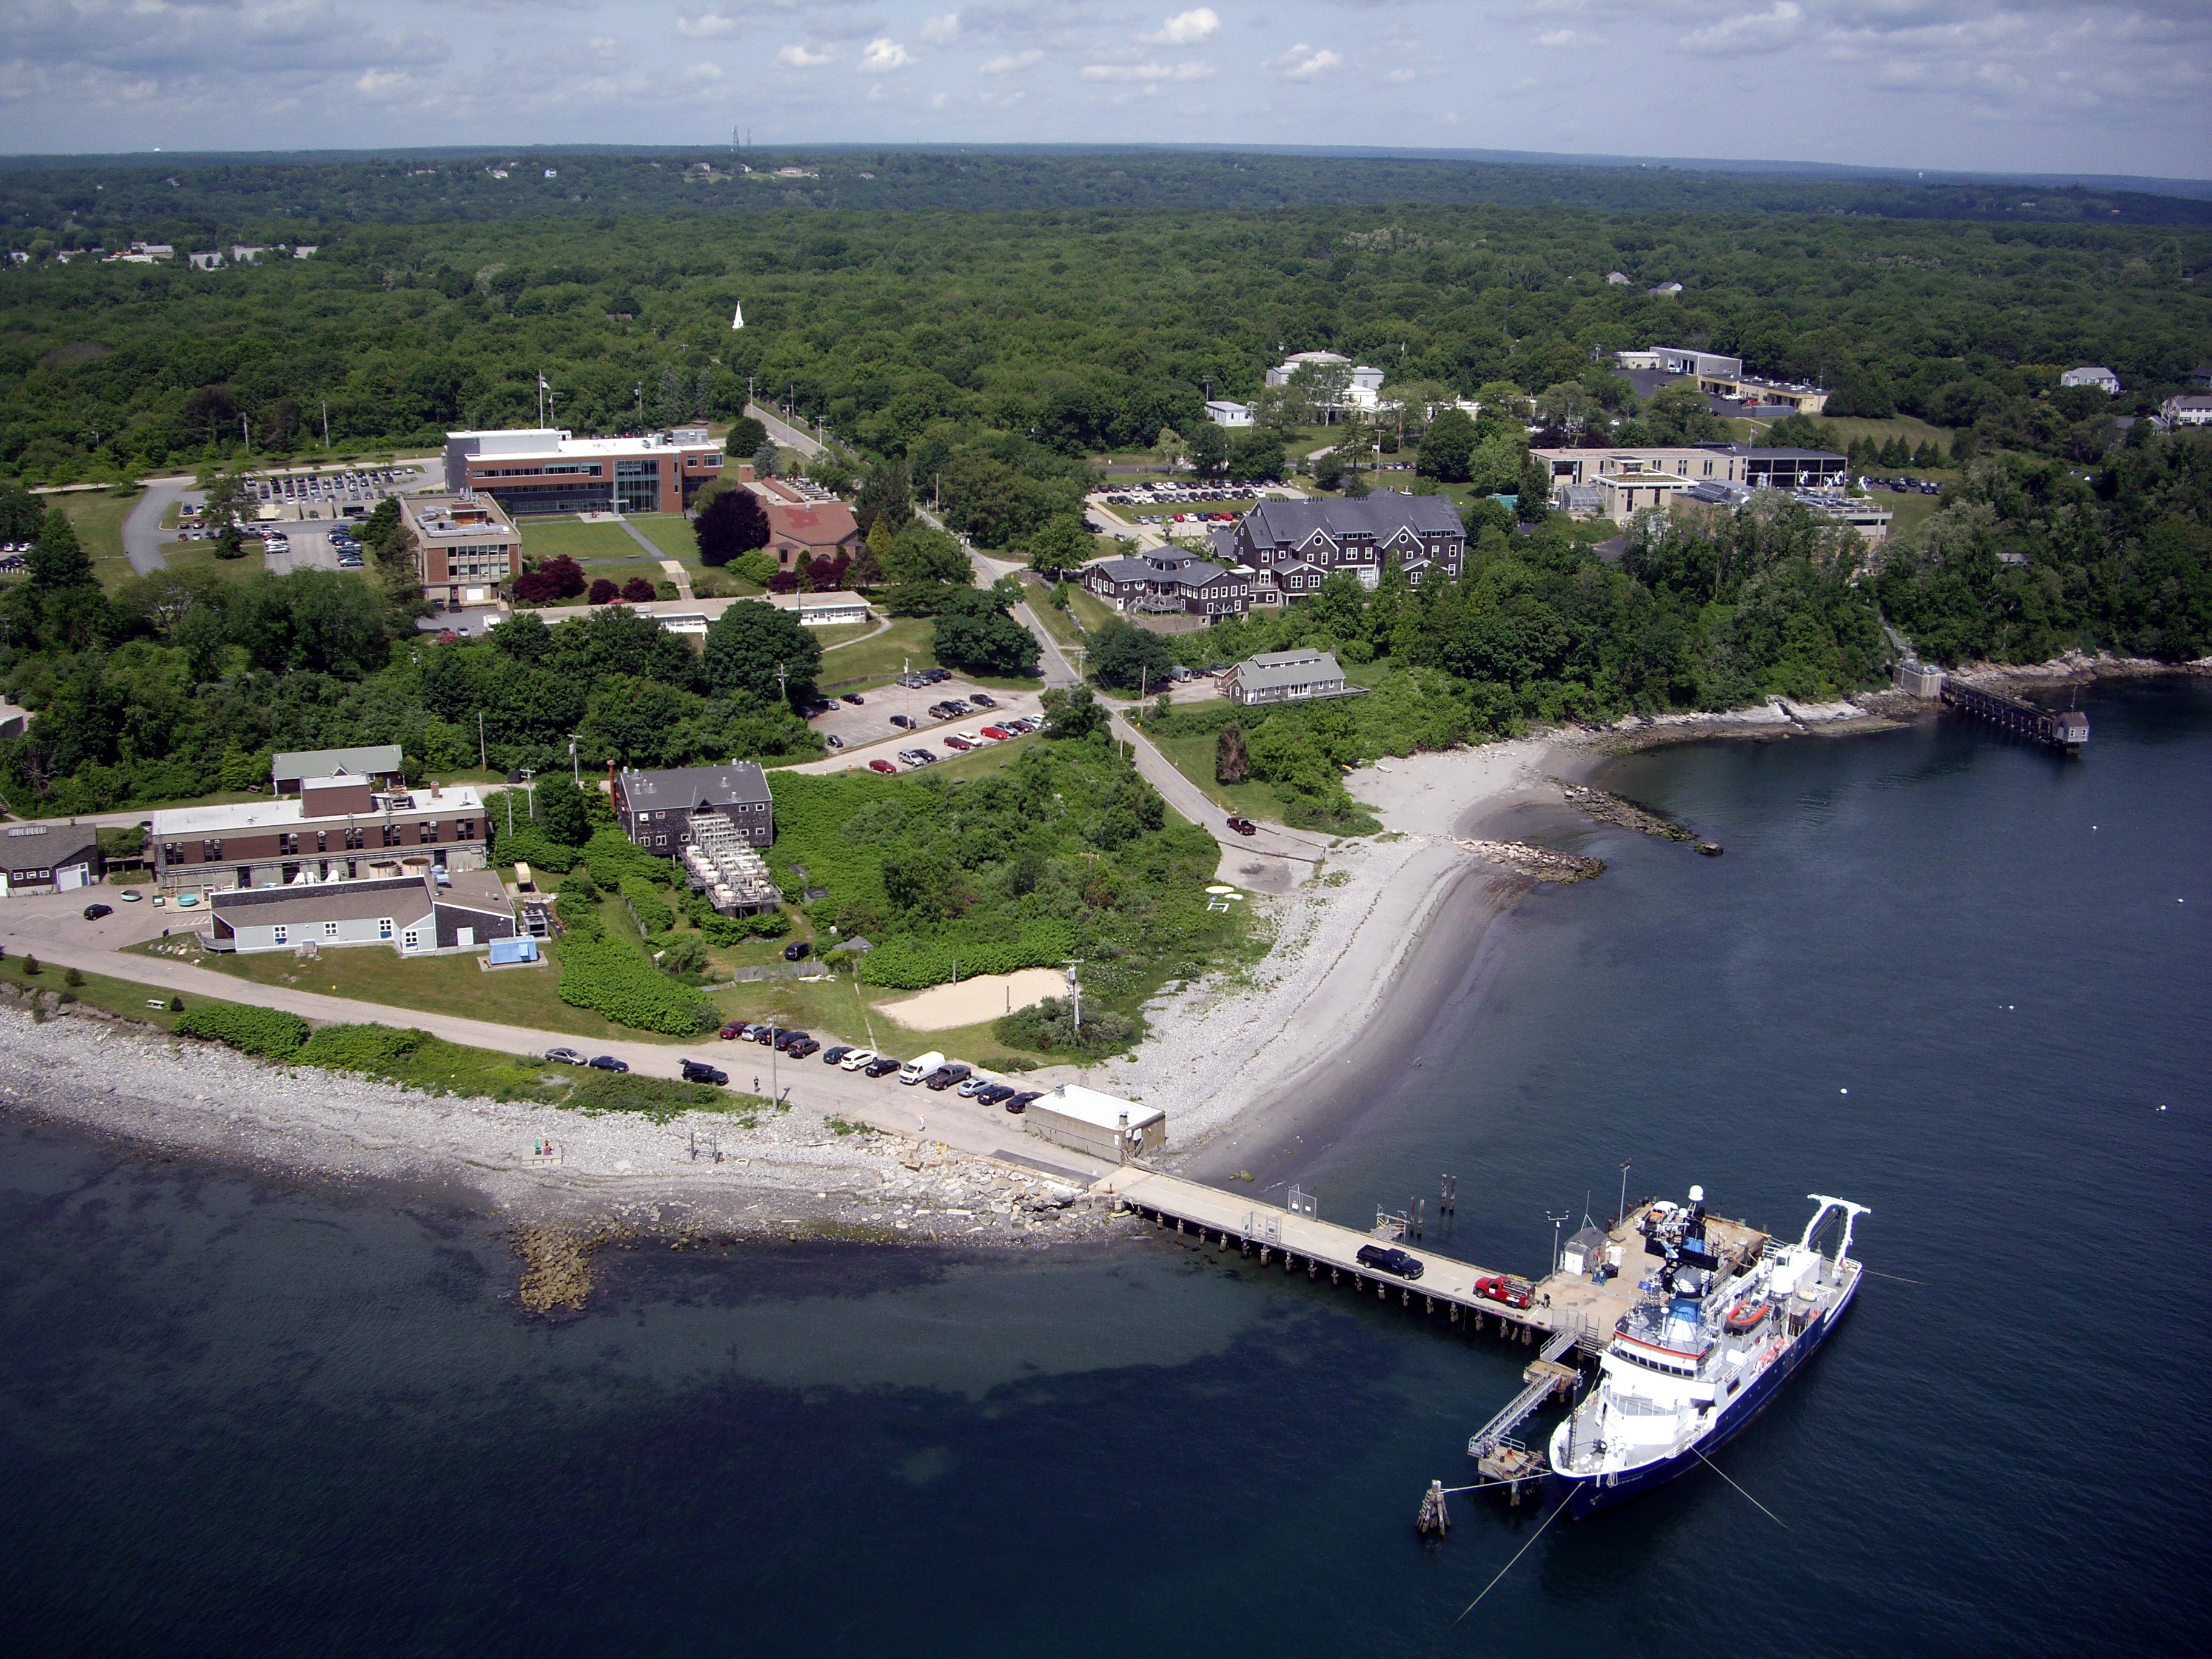 Aerial view of the Bay Campus and backyard with dock and ship. Photograph by Don Bousquet.